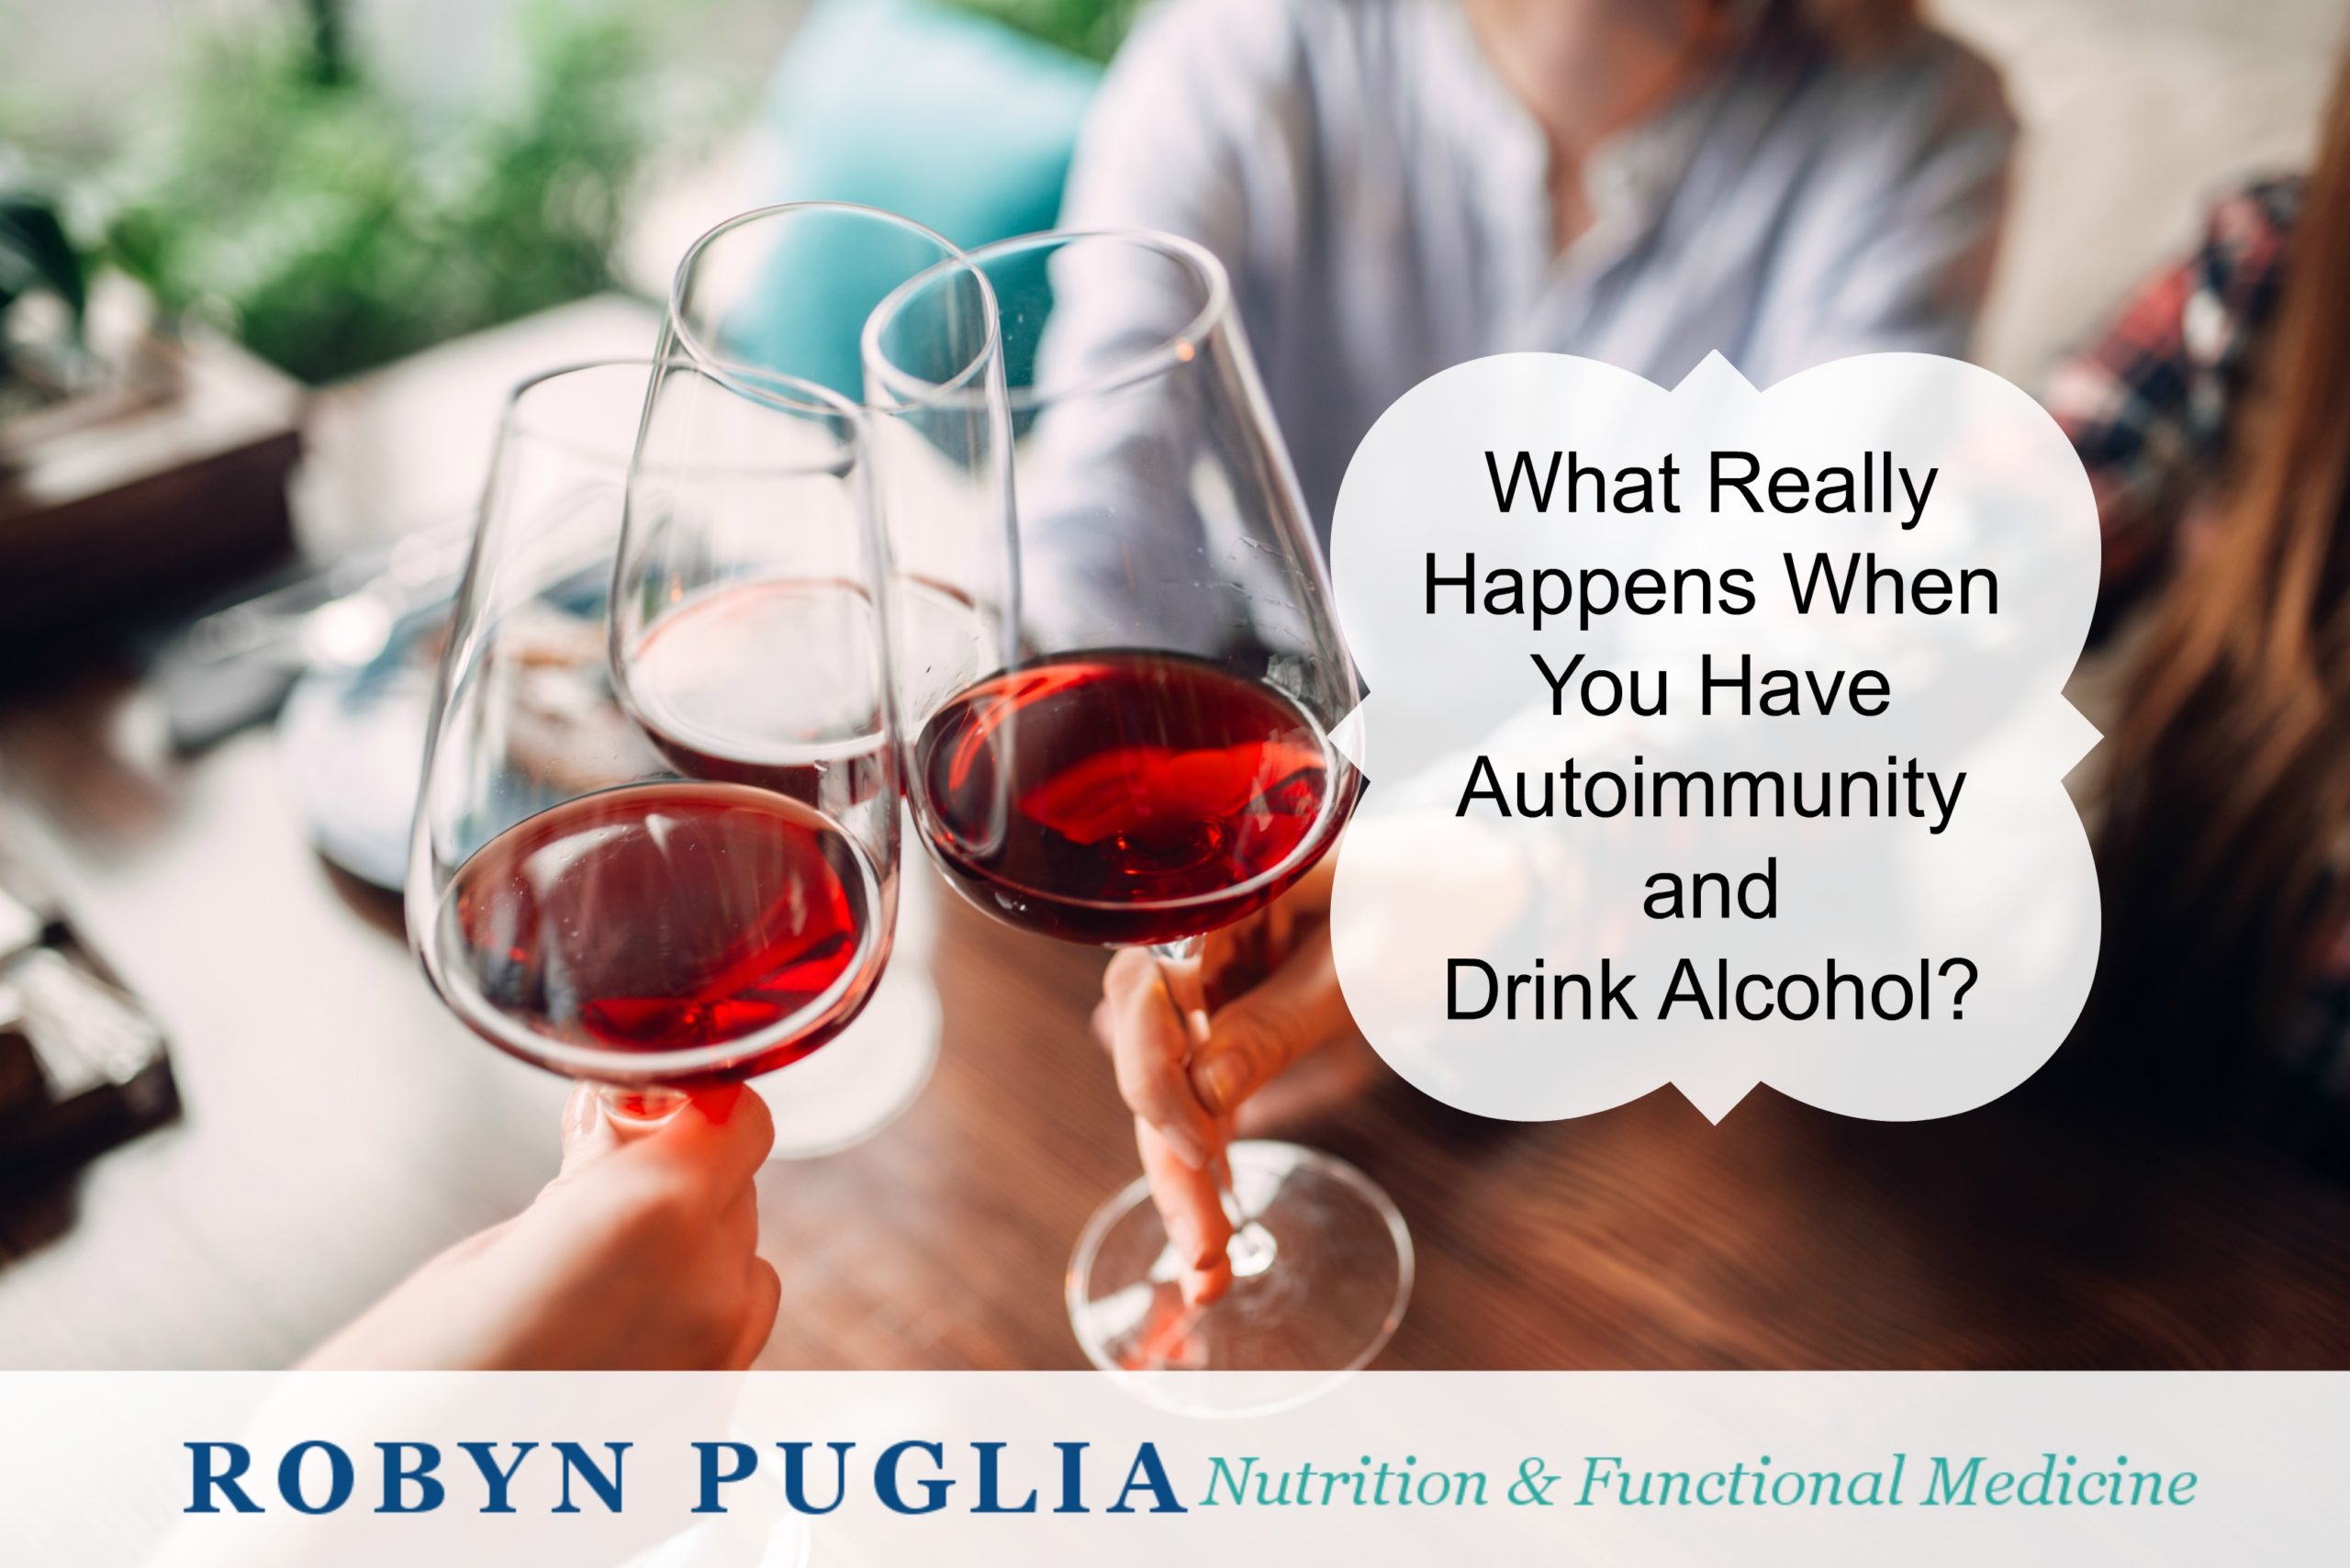 What Really Happens When You Have Autoimmunity and Drink Alcohol?